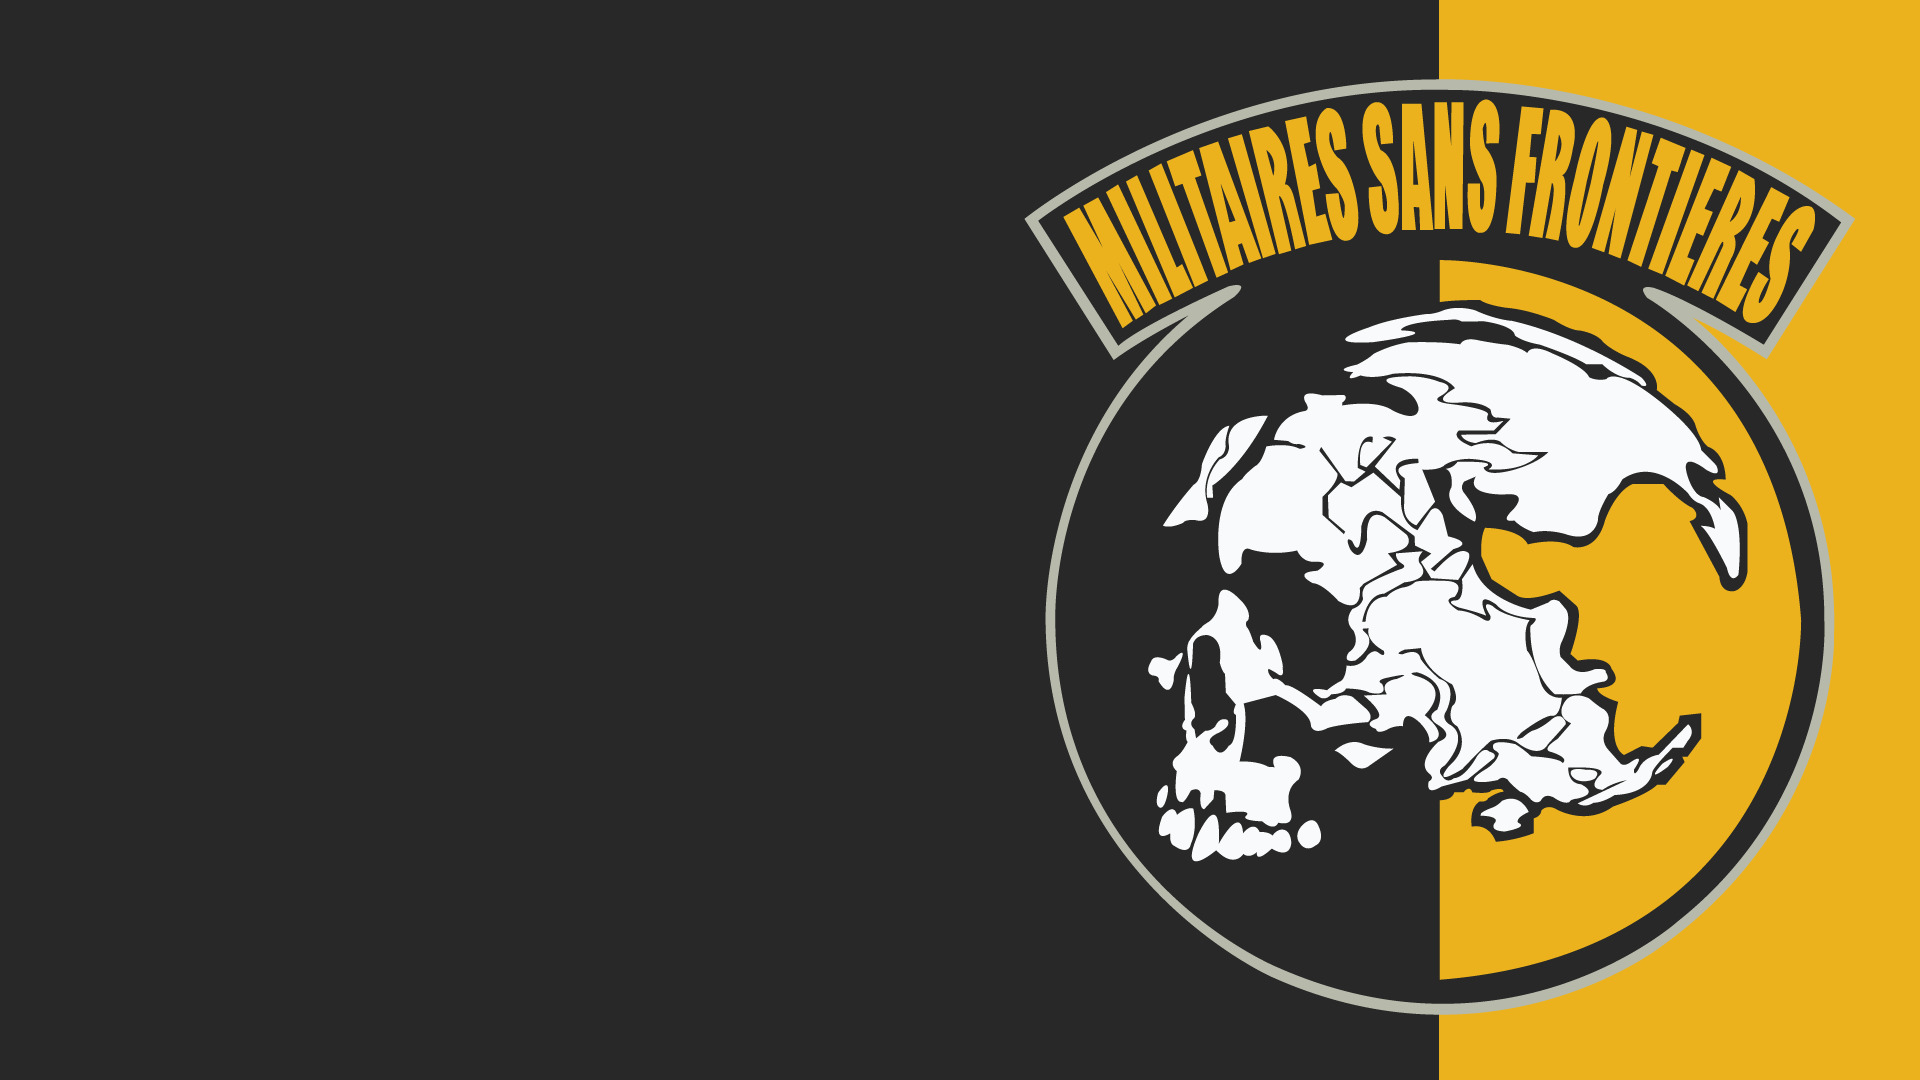 Metal Gear Solid Metal Gear Solid Peace Walker Militaires Sans Frontieres Wallpapers Hd Desktop And Mobile Backgrounds